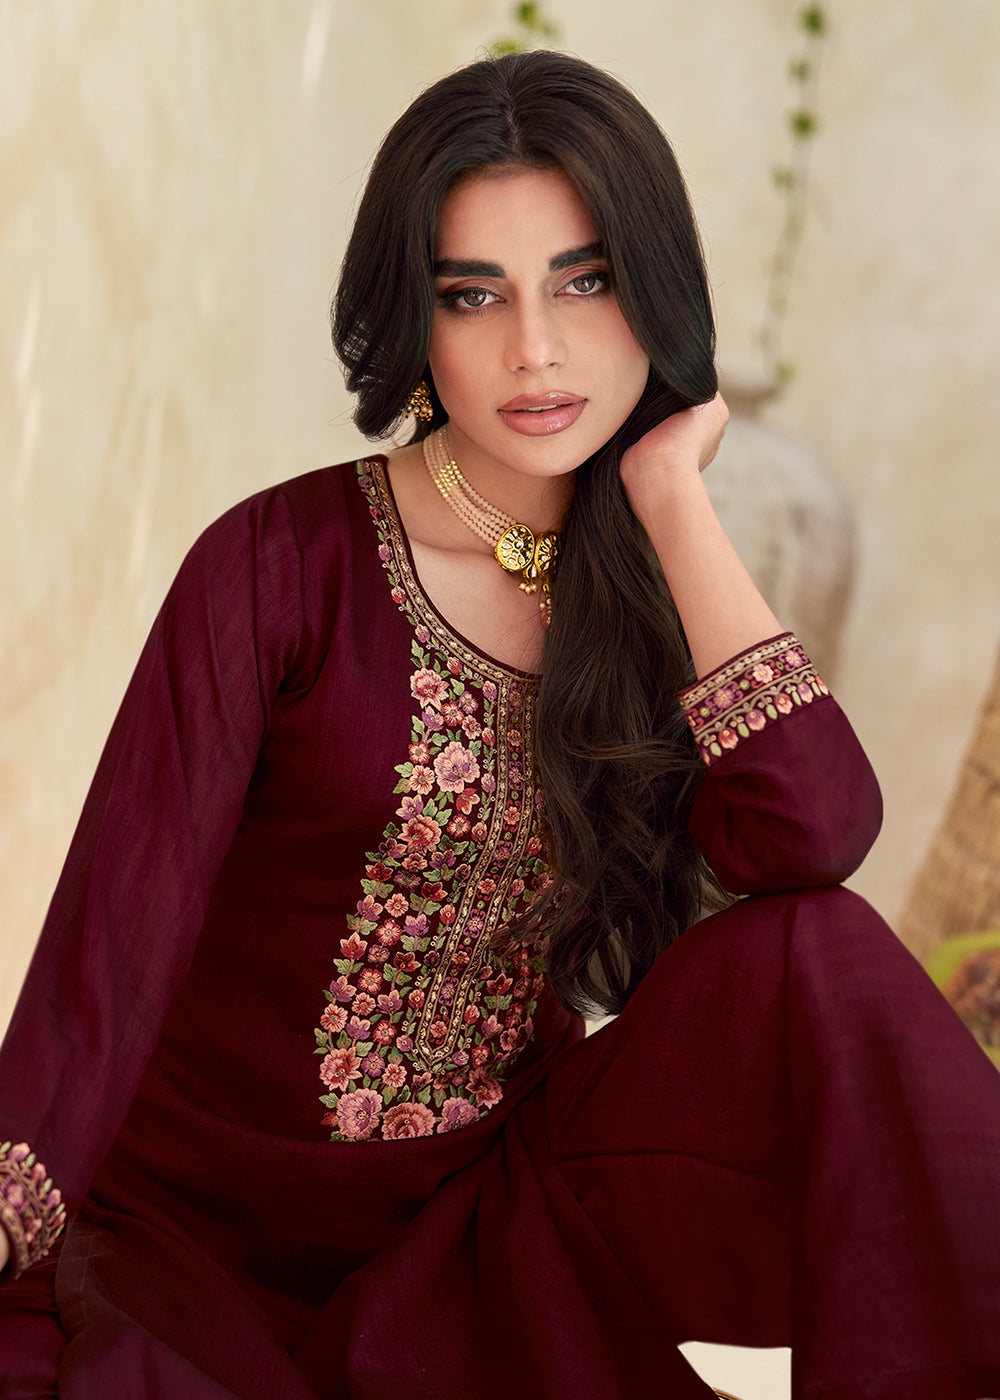 Buy Now Maroon Premium Silk Thread Embroidered Salwar Suit Online in USA, UK, Canada, Germany, Australia & Worldwide at Empress Clothing. 